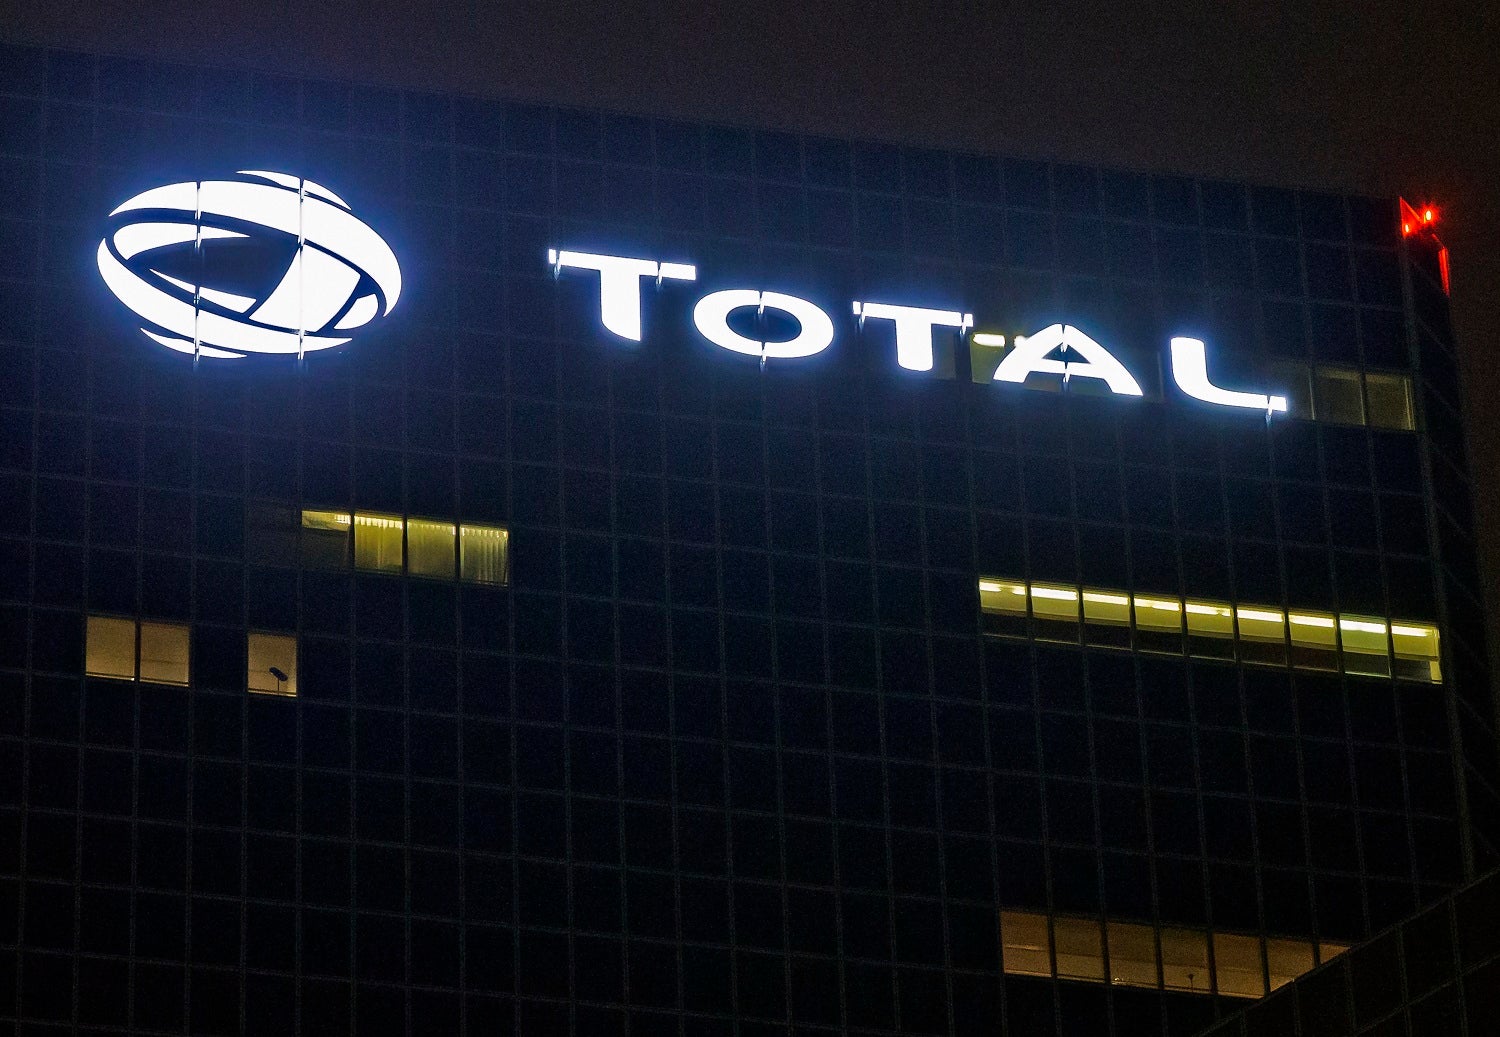 In this file photo, the logo of French oil giant Total SA is pictured at company headquarters in La Defense business district, outside Paris.